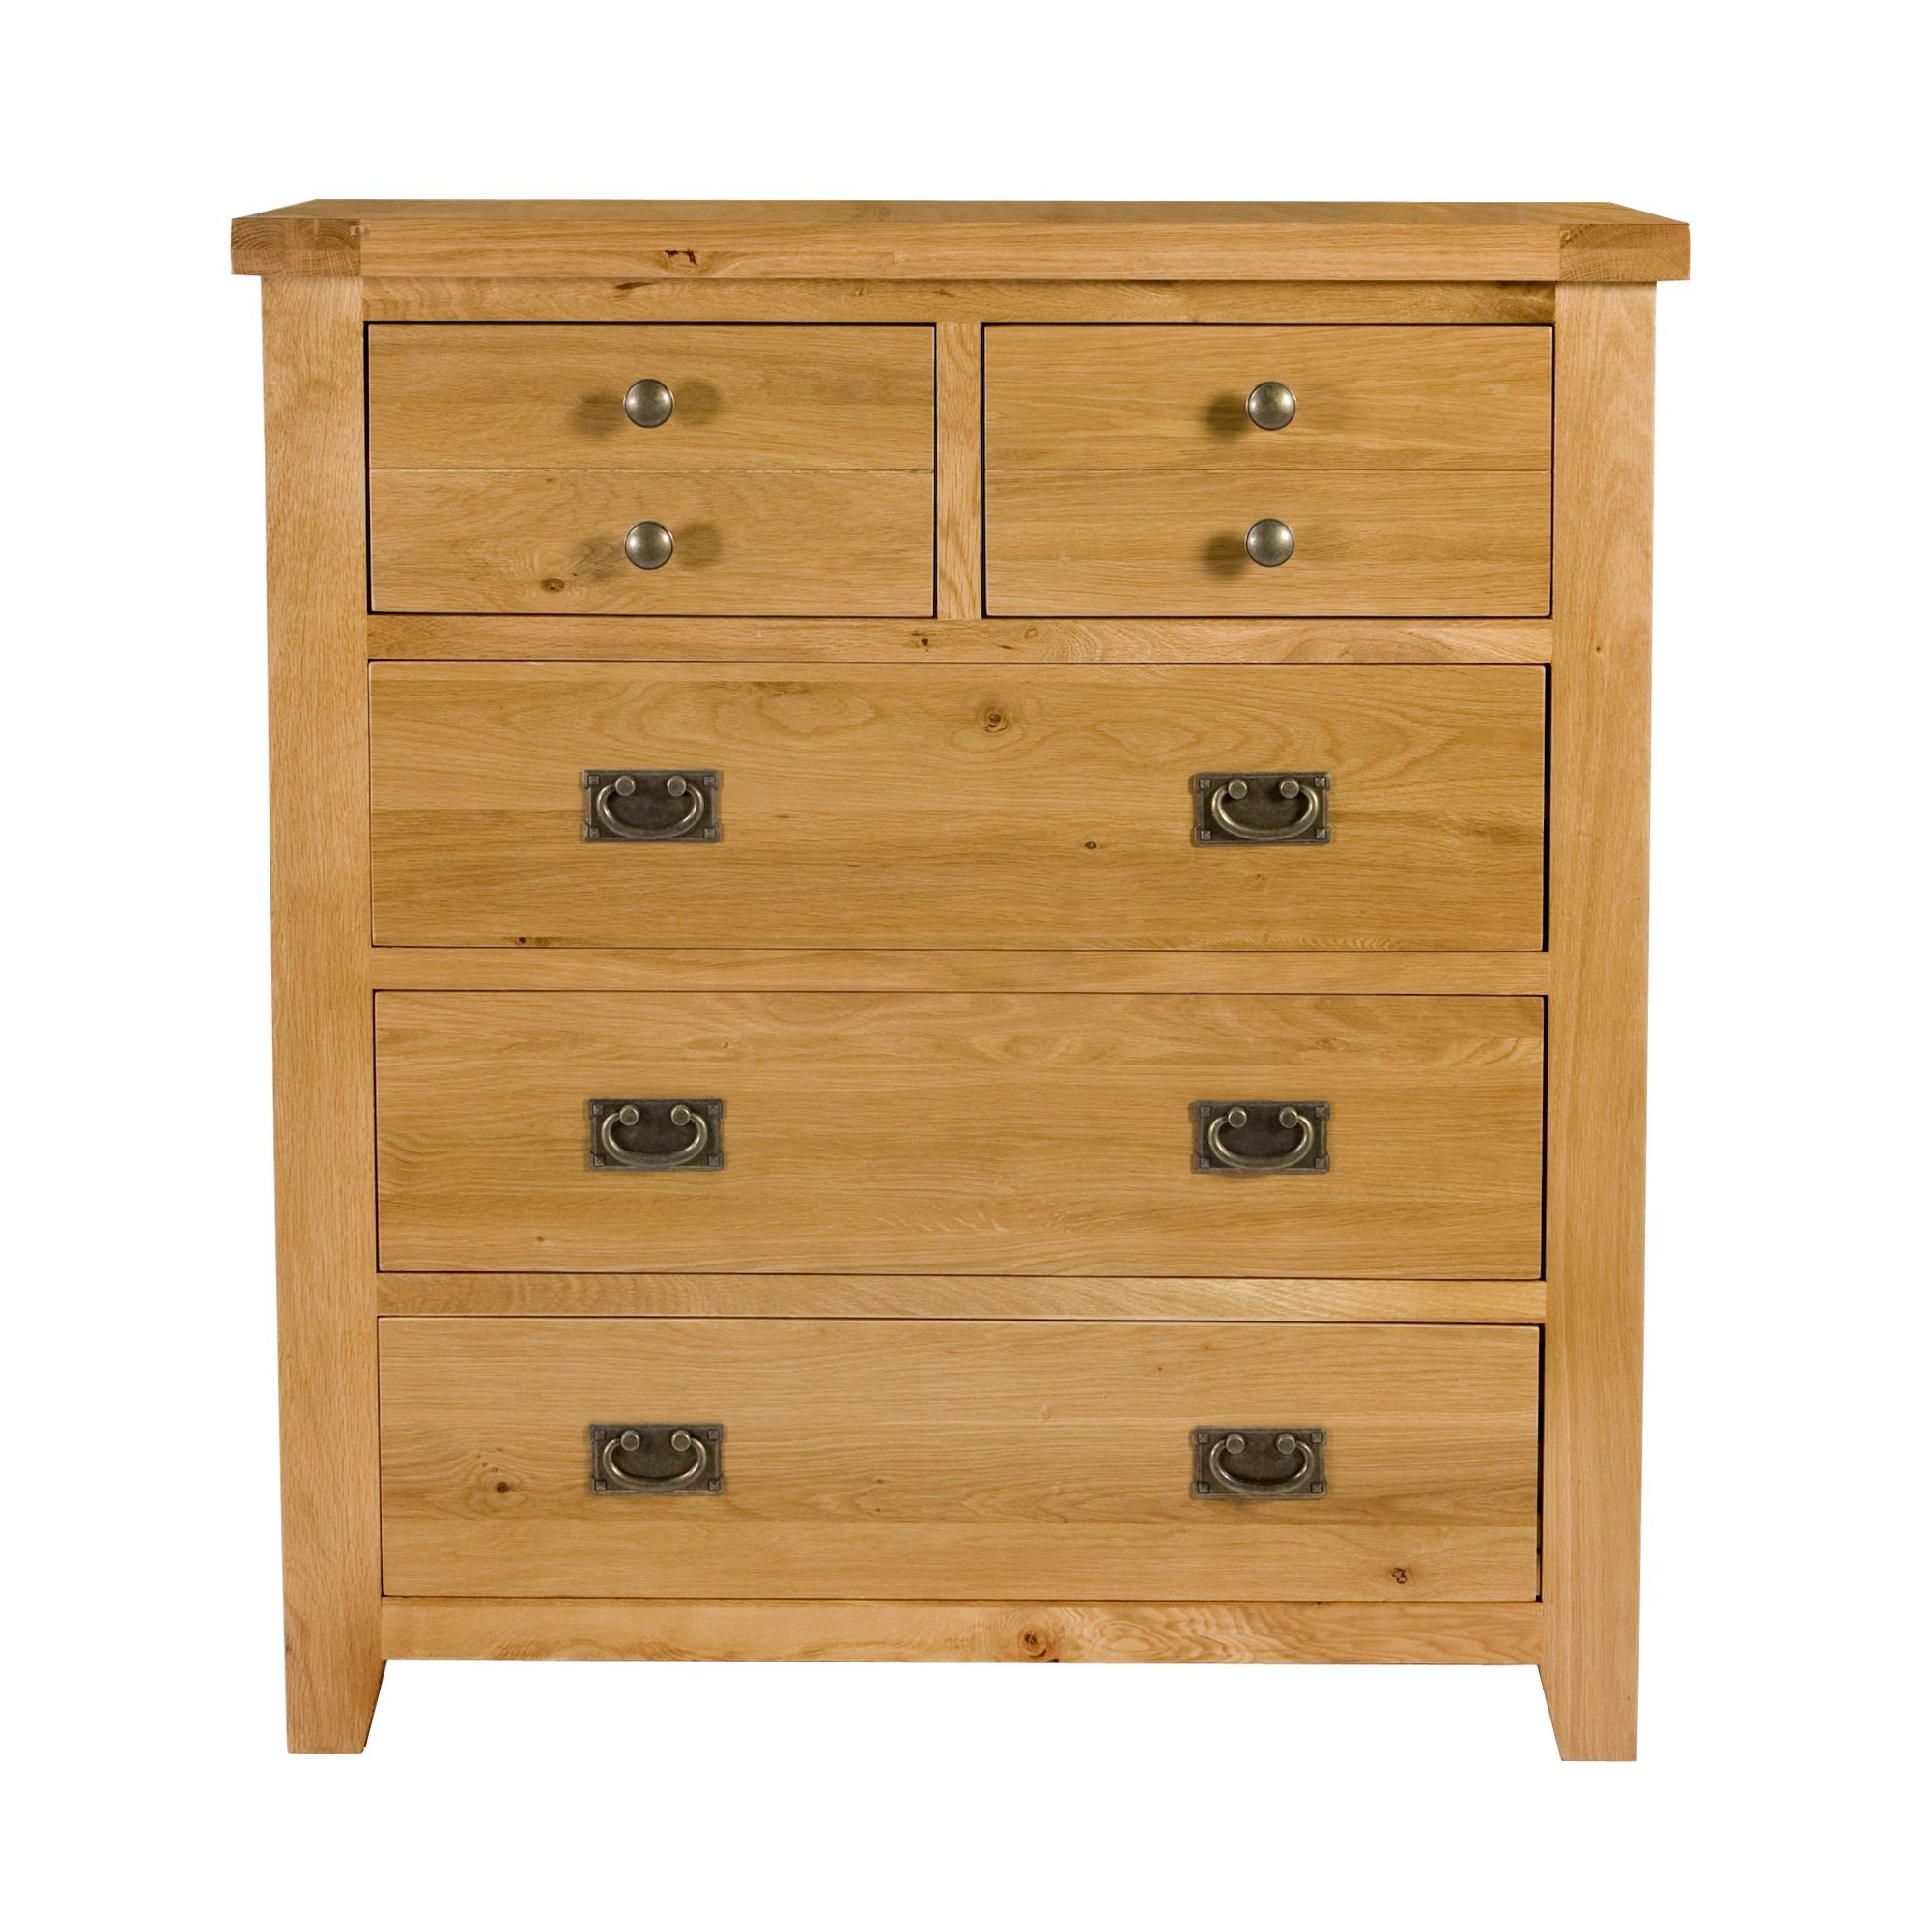 Elements Ludmilla Two Over Three Chest in Warm Lacquer at Tesco Direct